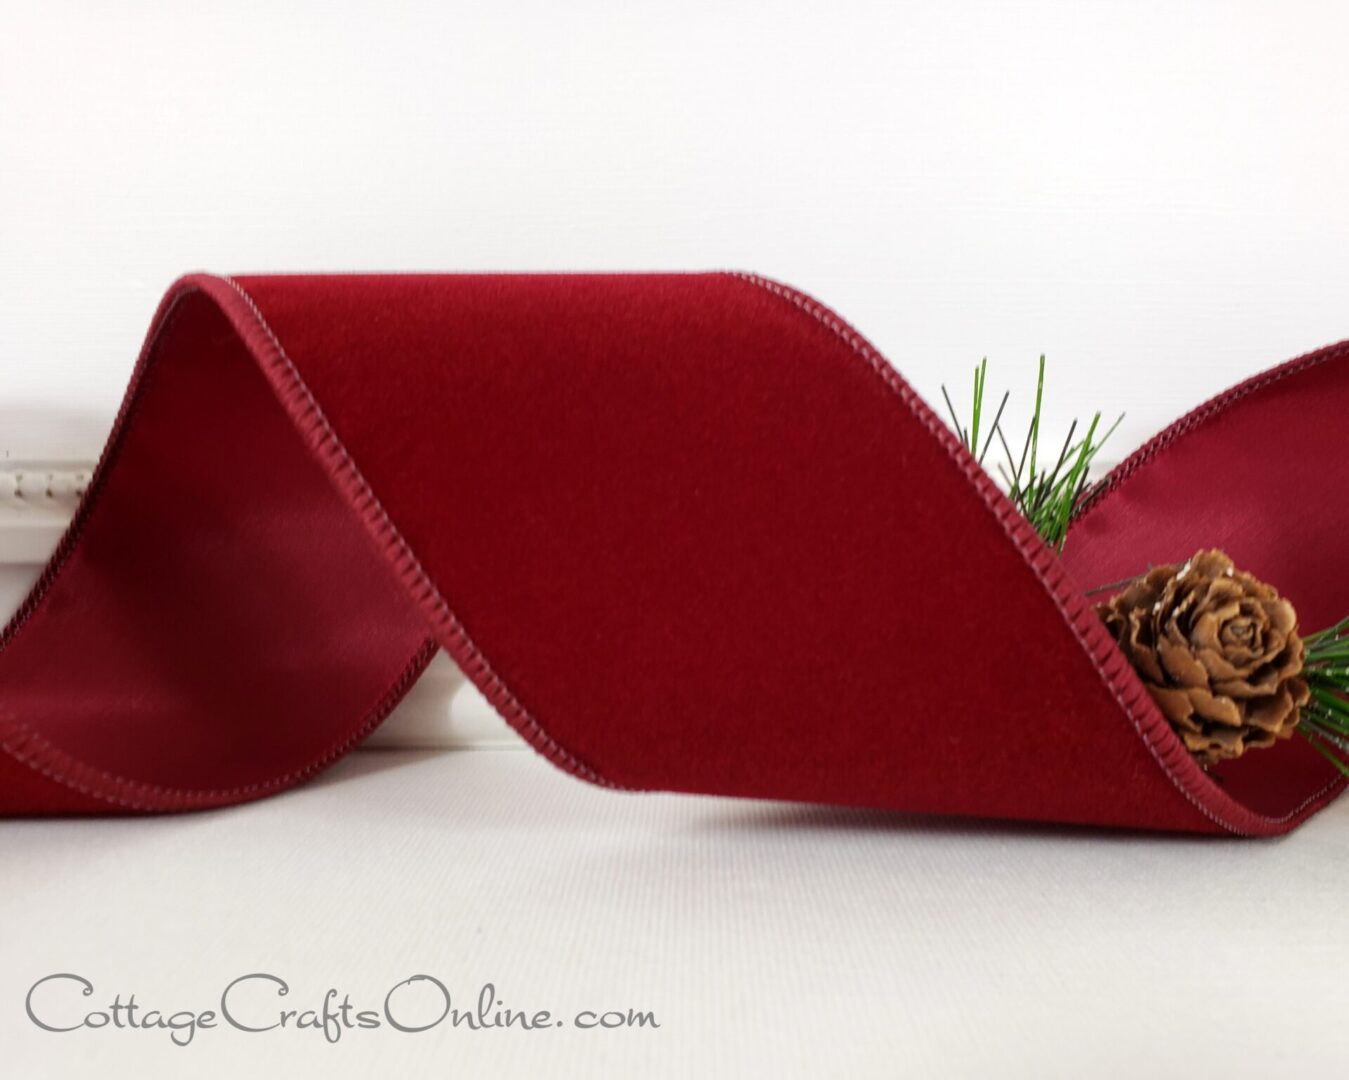 A red ribbon with pine cones on it